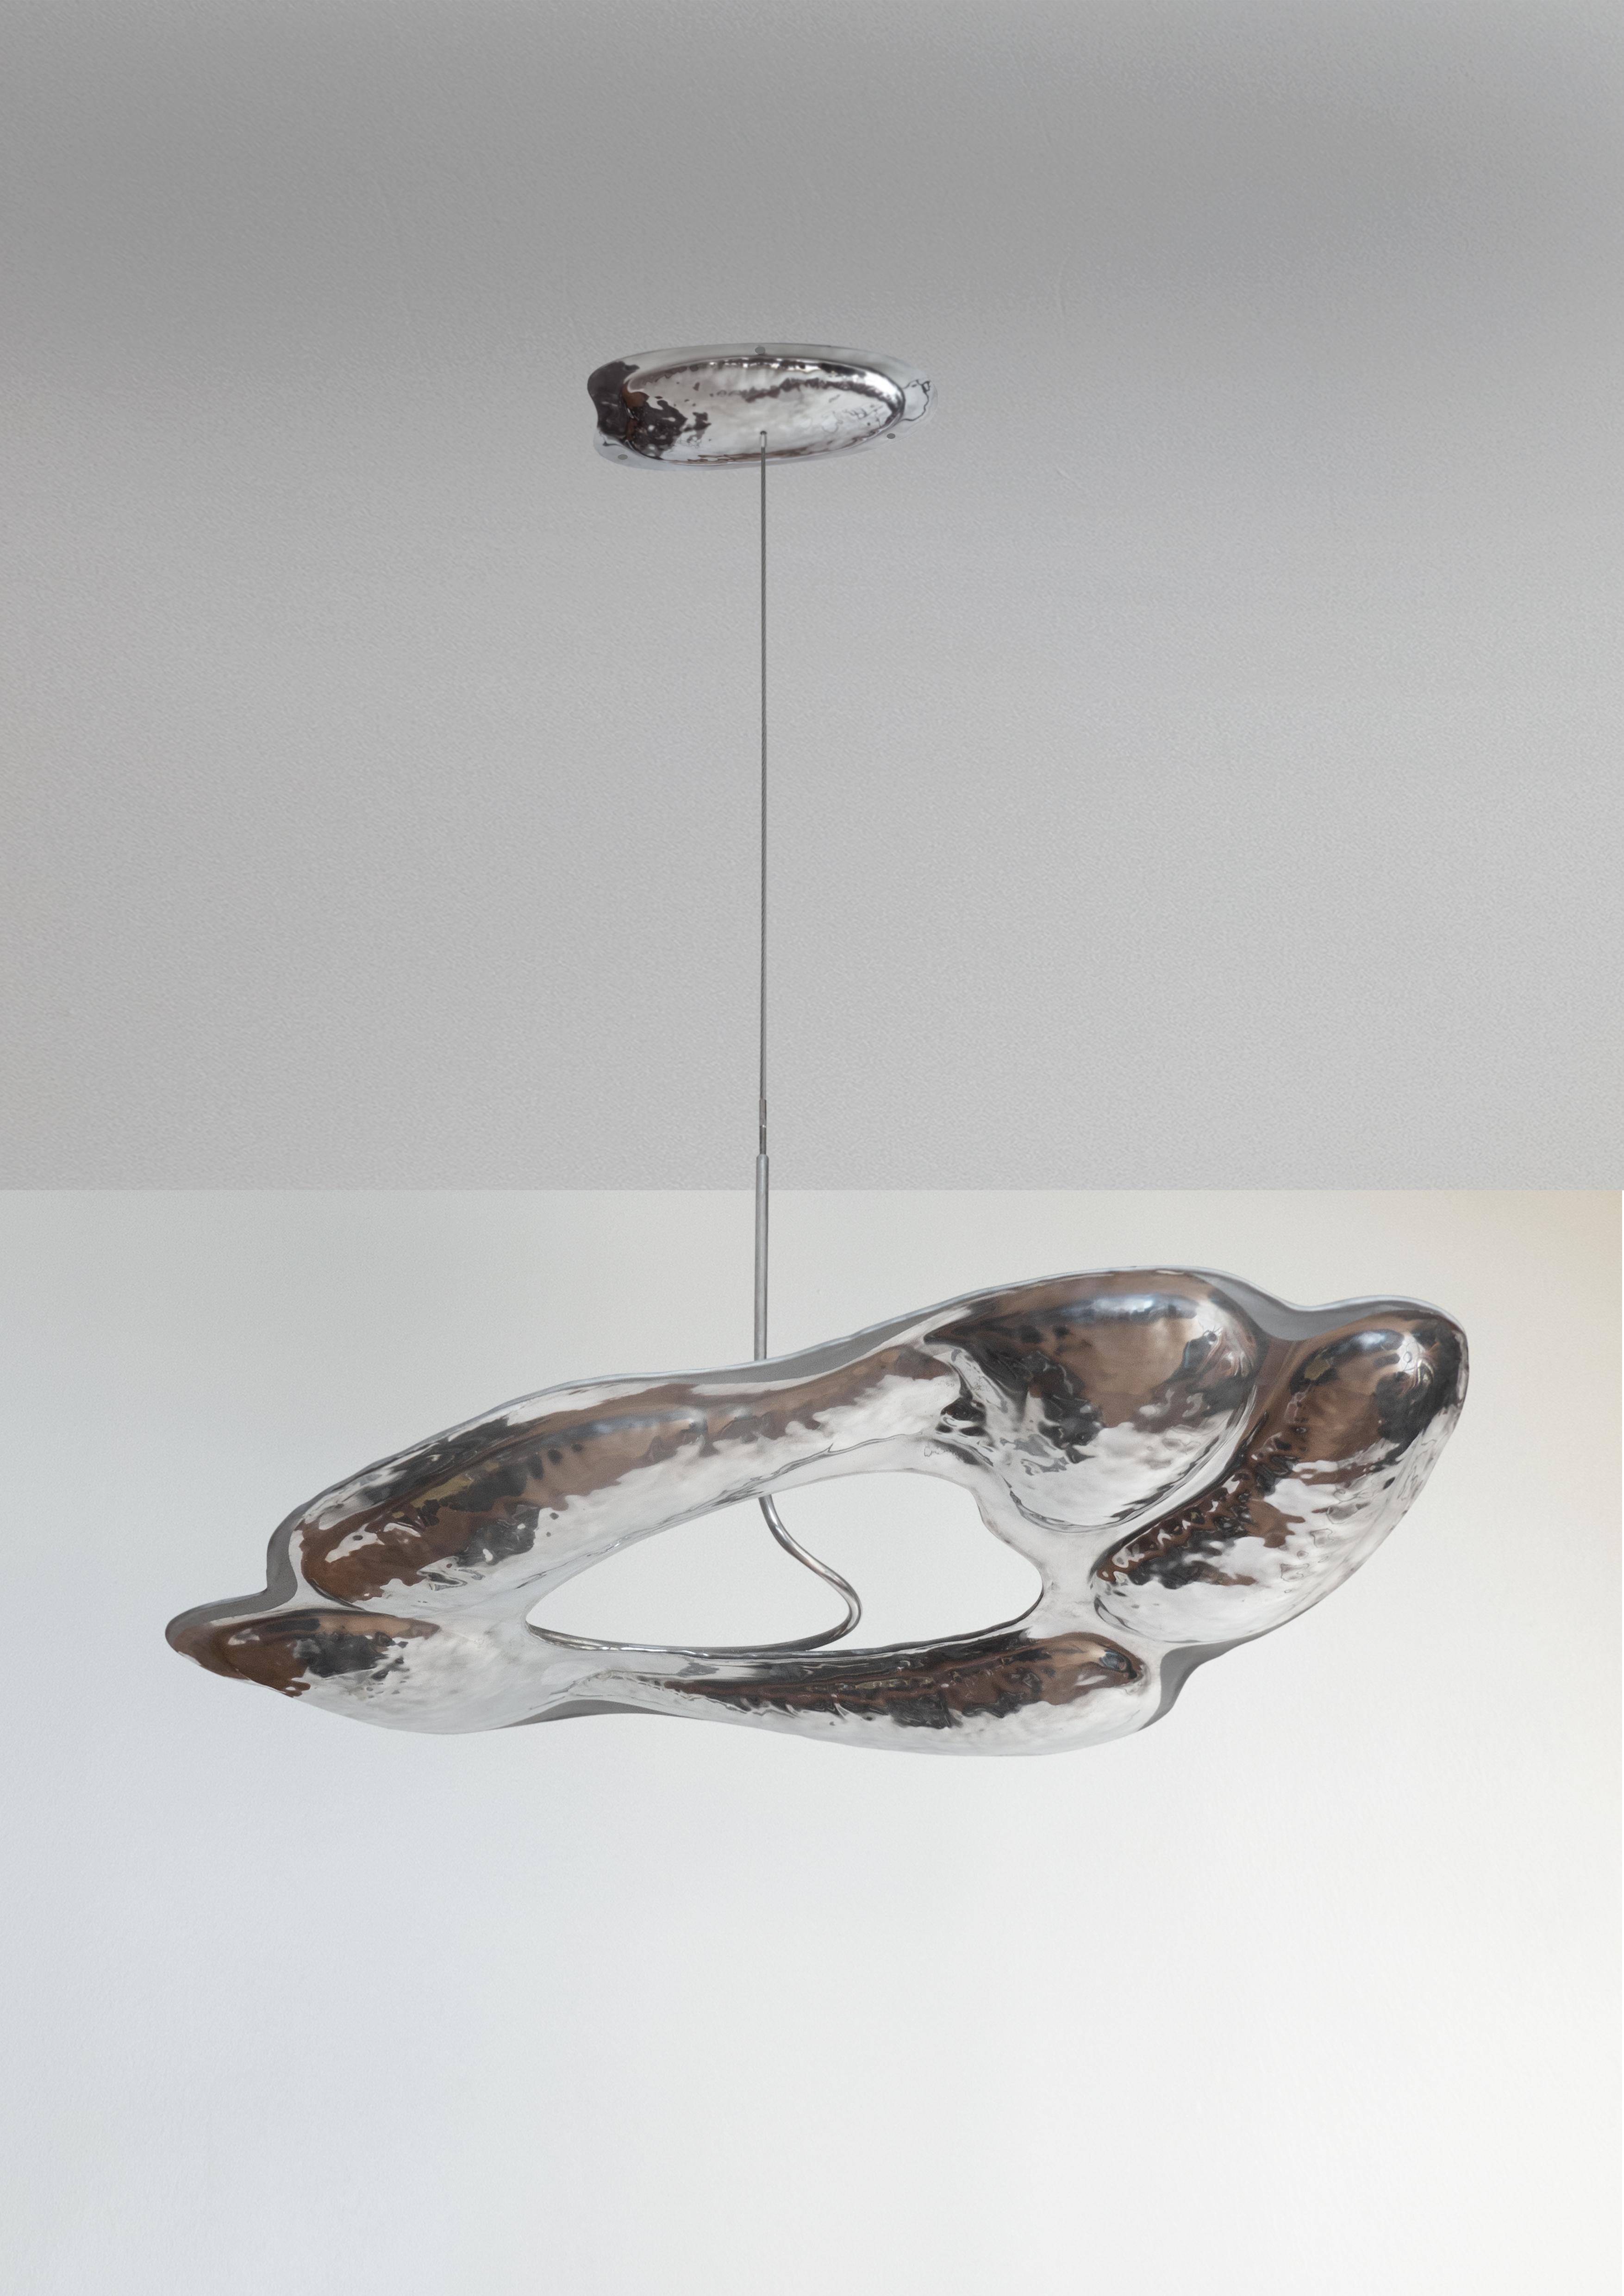 Smoke cloud chandelier by Christian and Jade
Smoke cloud chandelier
Year: 2020
Material: Hammered aluminium
Size: H 50, L 80, W 65 cm and adjustable length or to size

Smoke cloud chandelier is an oil lamp that floats mid space, cap-
Turing